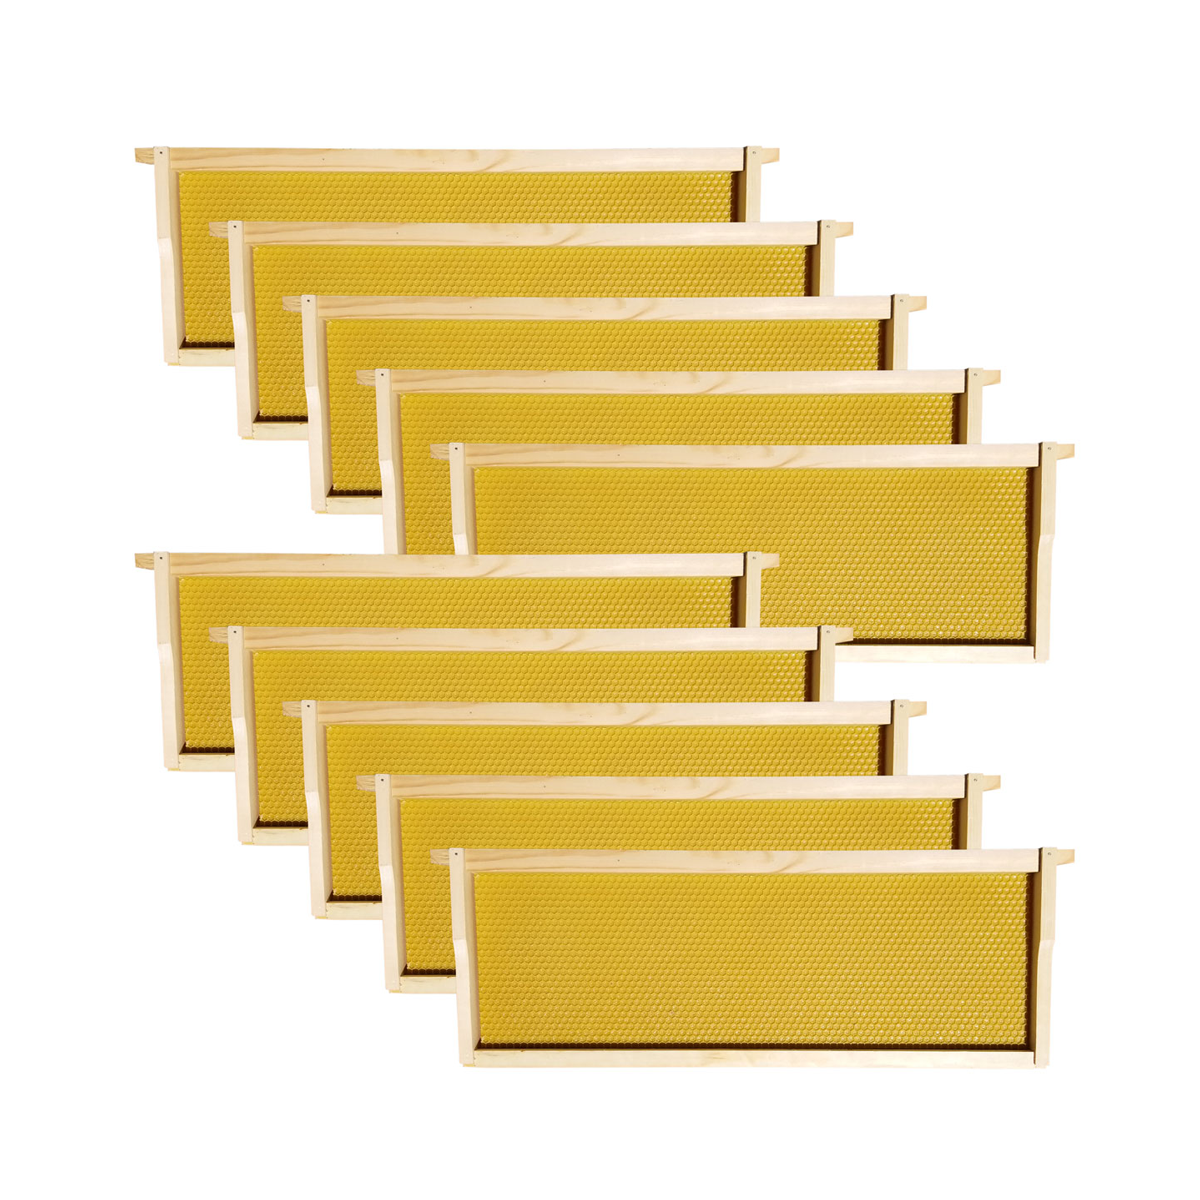 10 Frame Medium Honey Super Box w/ Dovetail Joints (Fully Assembled w/ Frames and Foundations)